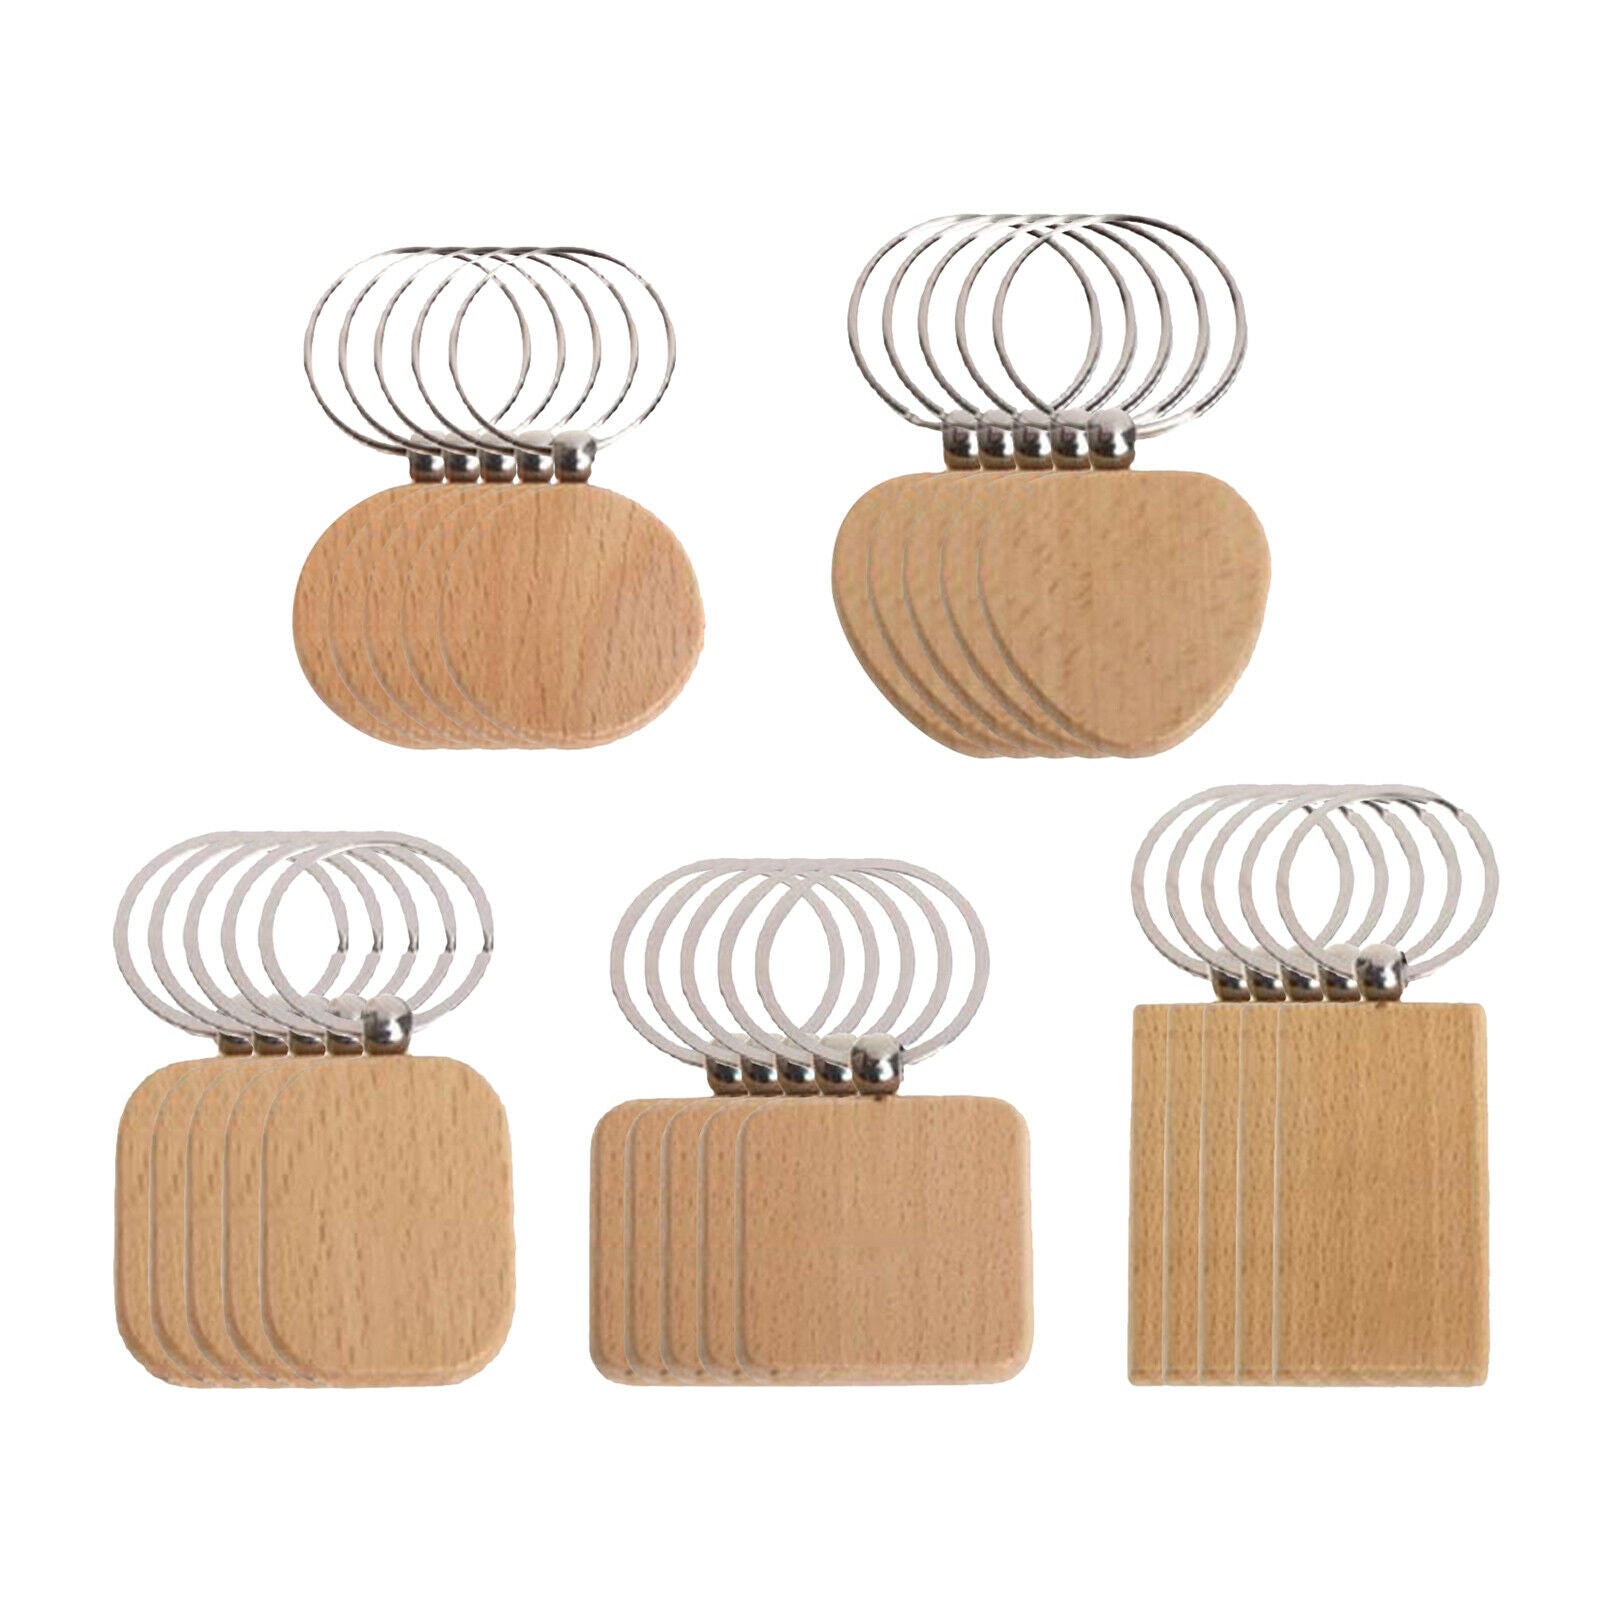 Pack of 25 Unfinished Blank Wooden Key Chain Keychain Rings Car Pendant DIY